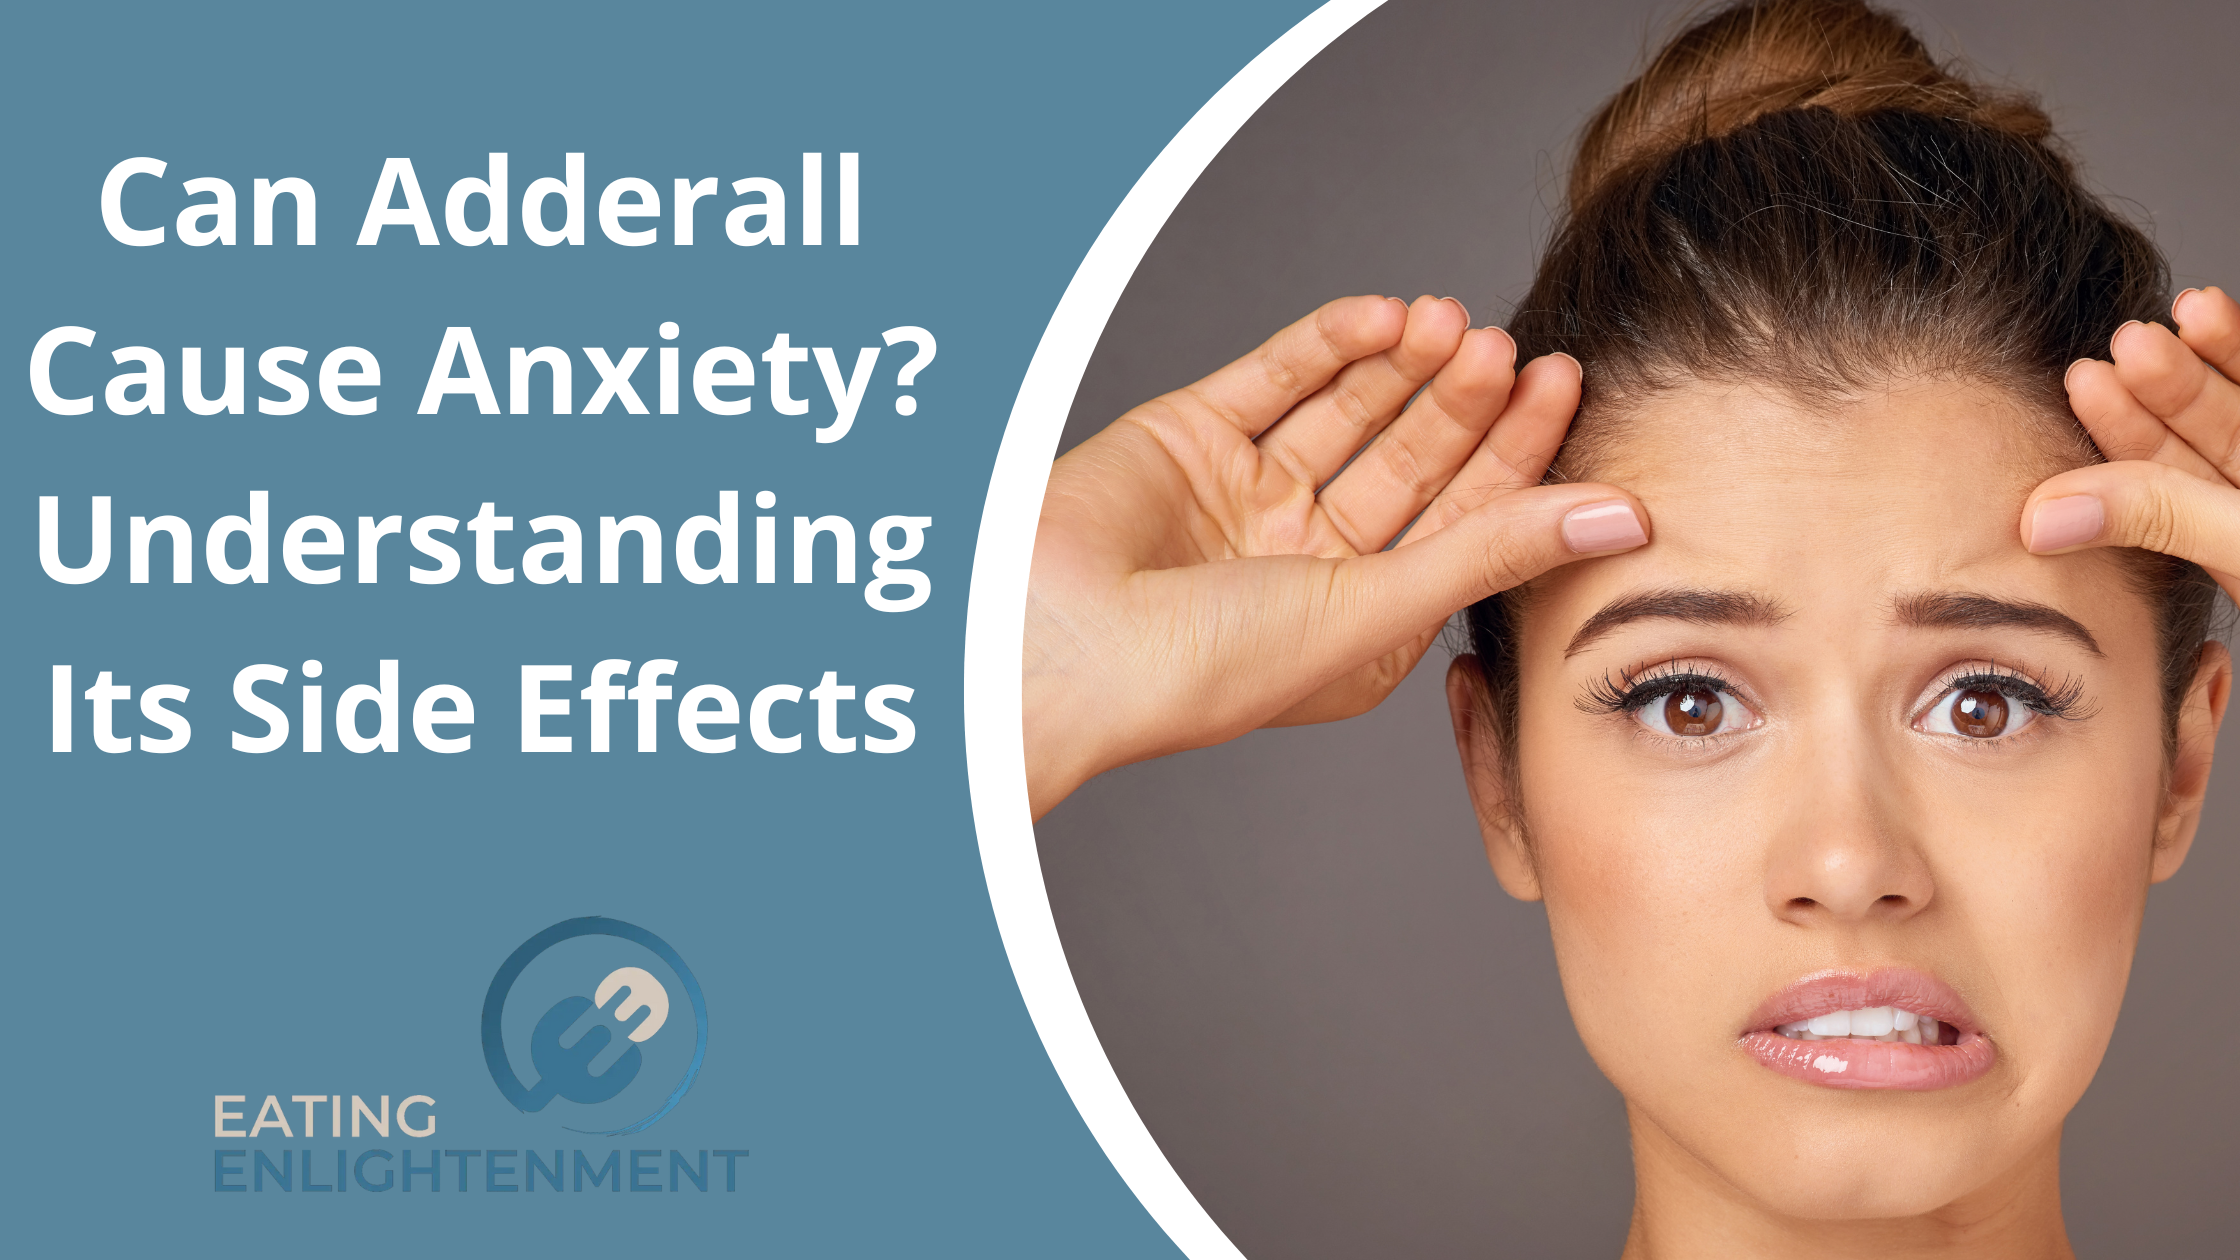 : Can Adderall Cause Anxiety? Understanding Its Side Effects